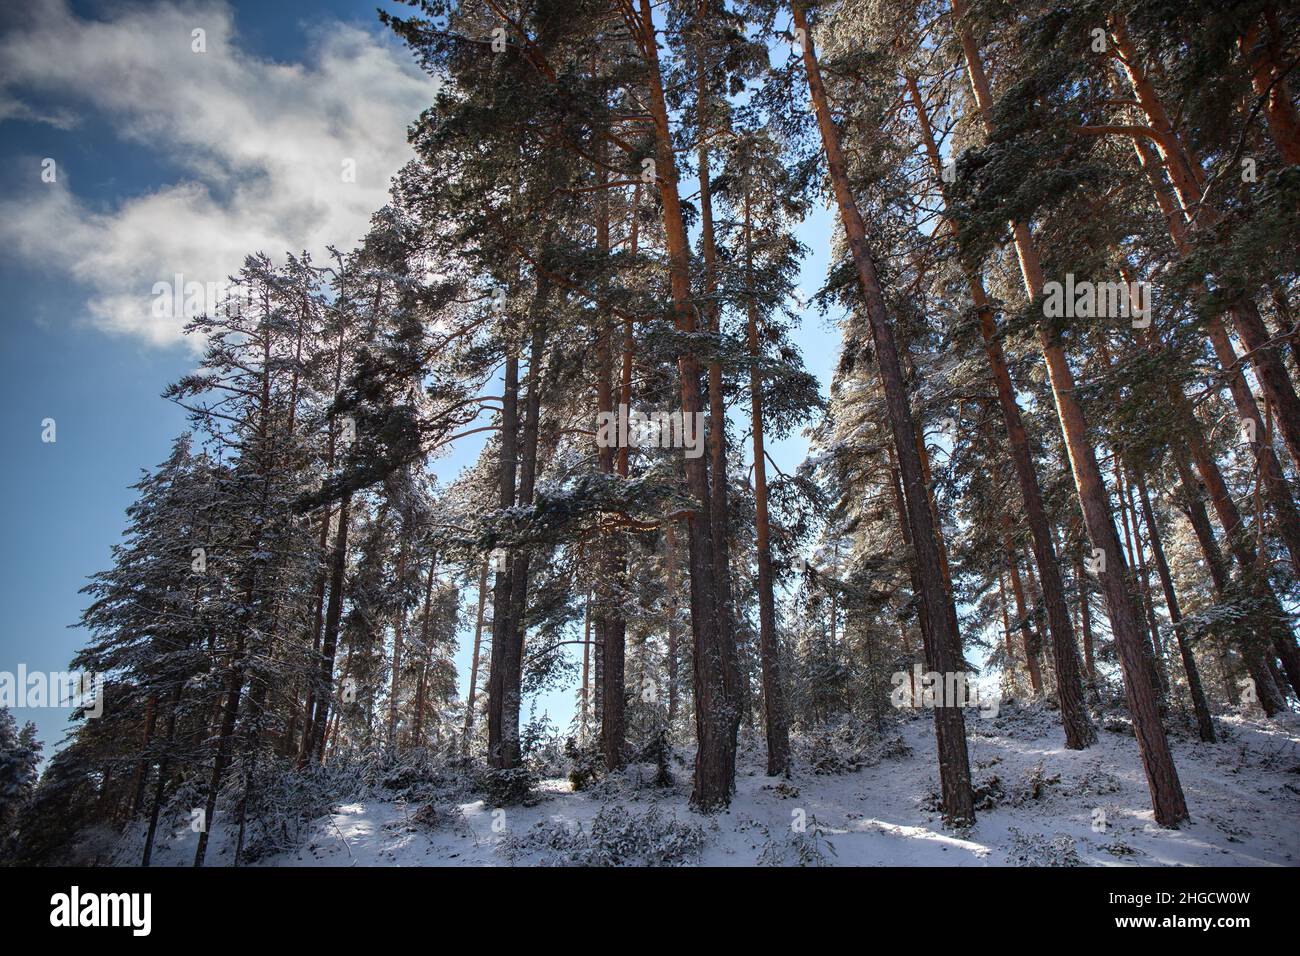 Snowy forest landscape with Scots Pines, Pinus Sylvestris trees Stock Photo